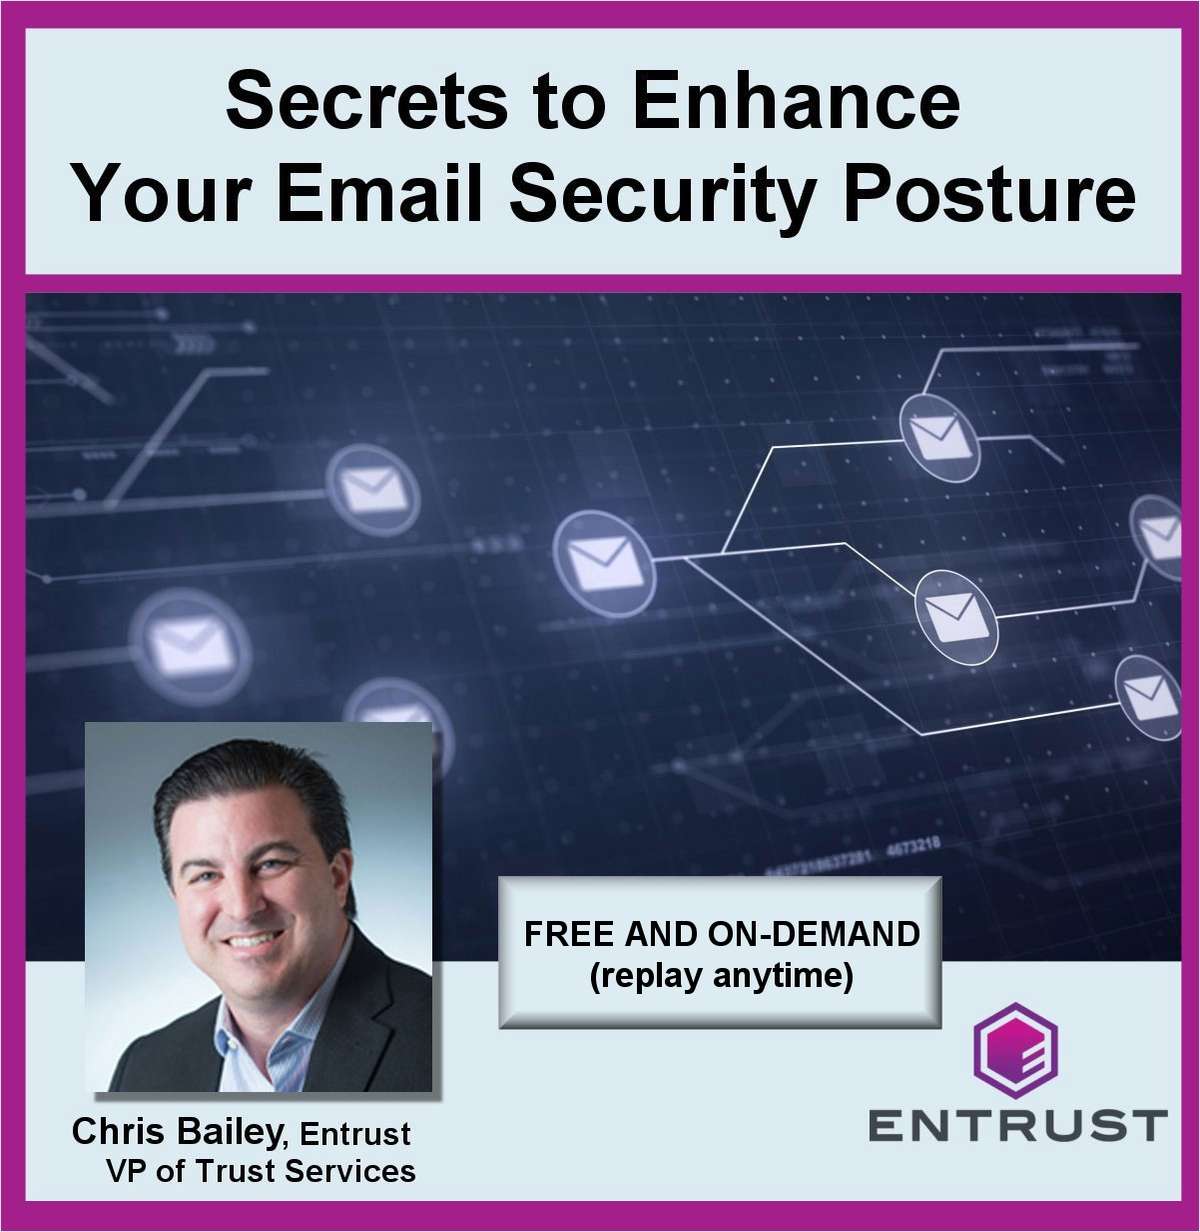 Secrets to Enhance Your Email Security Posture